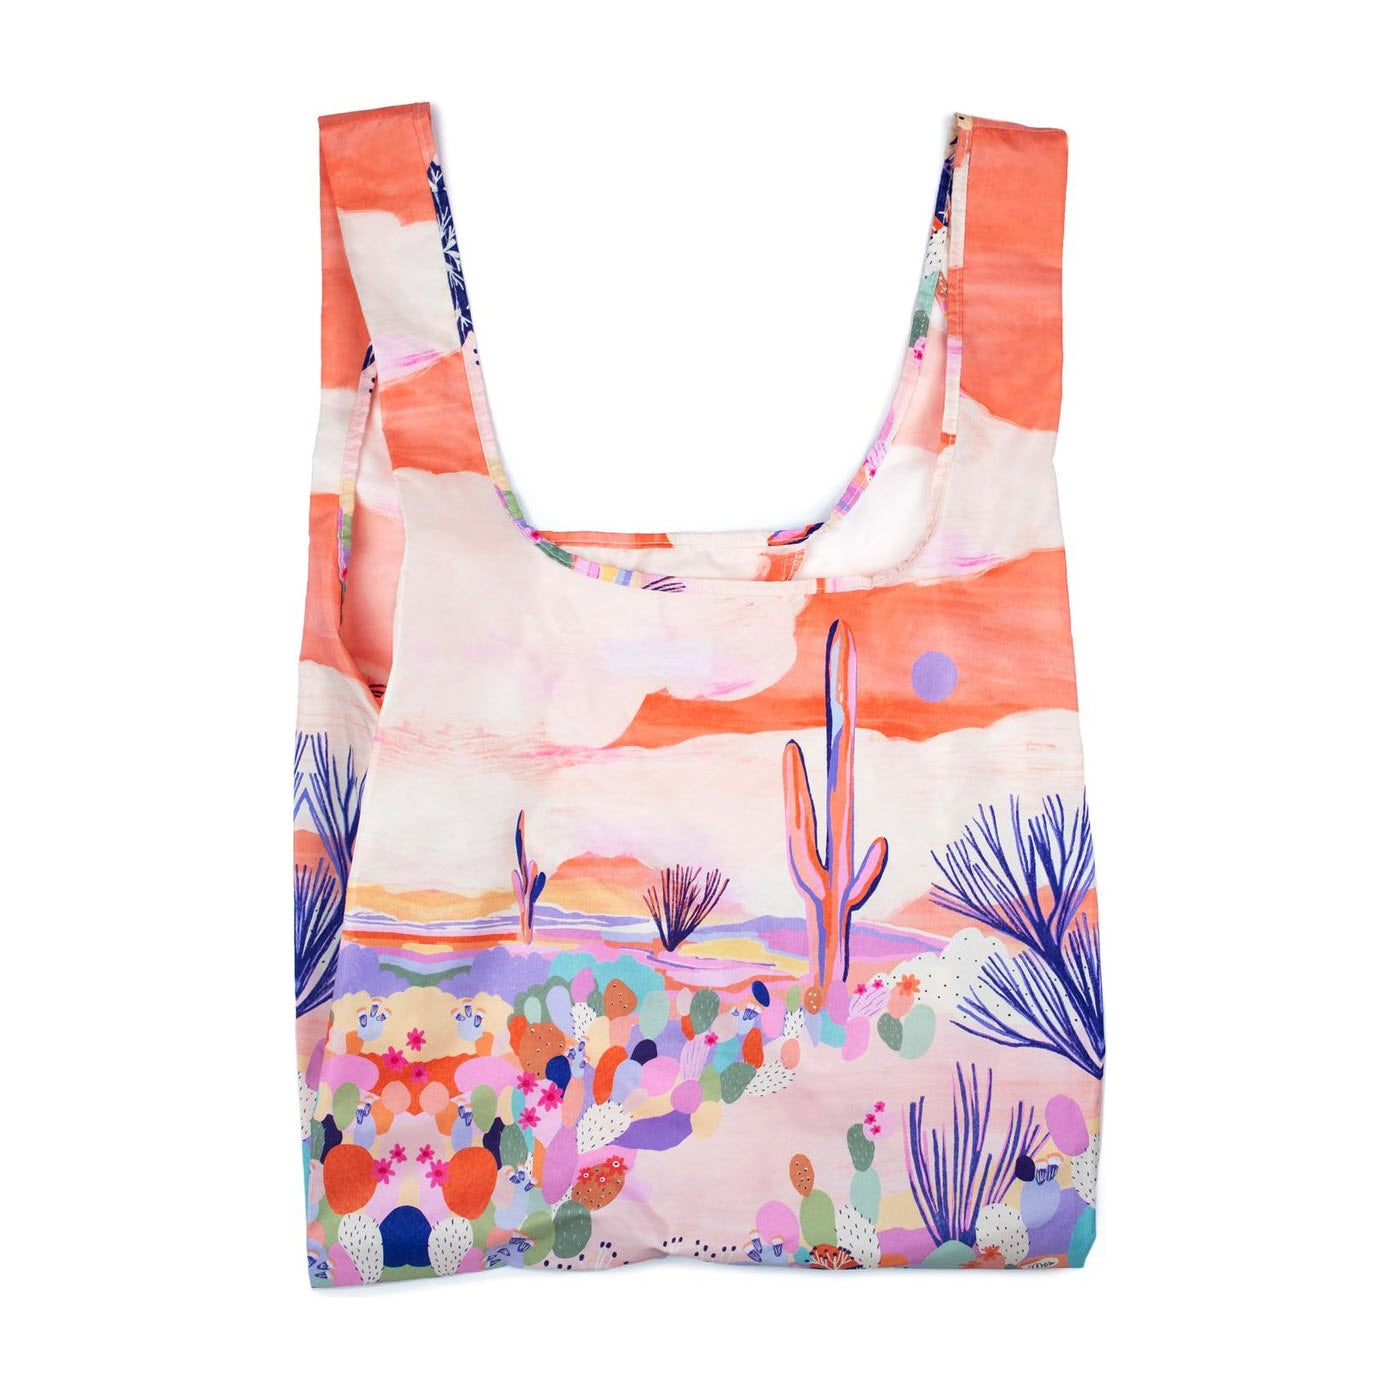 Colorful desert-themed tote bag with vibrant prints of cacti and floral patterns, featuring pink and blue hues on a white background. This eco-friendly KIND MEDIUM SHOPPER MARINA CARNIVAL by Kind Bags is crafted to offer a large capacity for your.